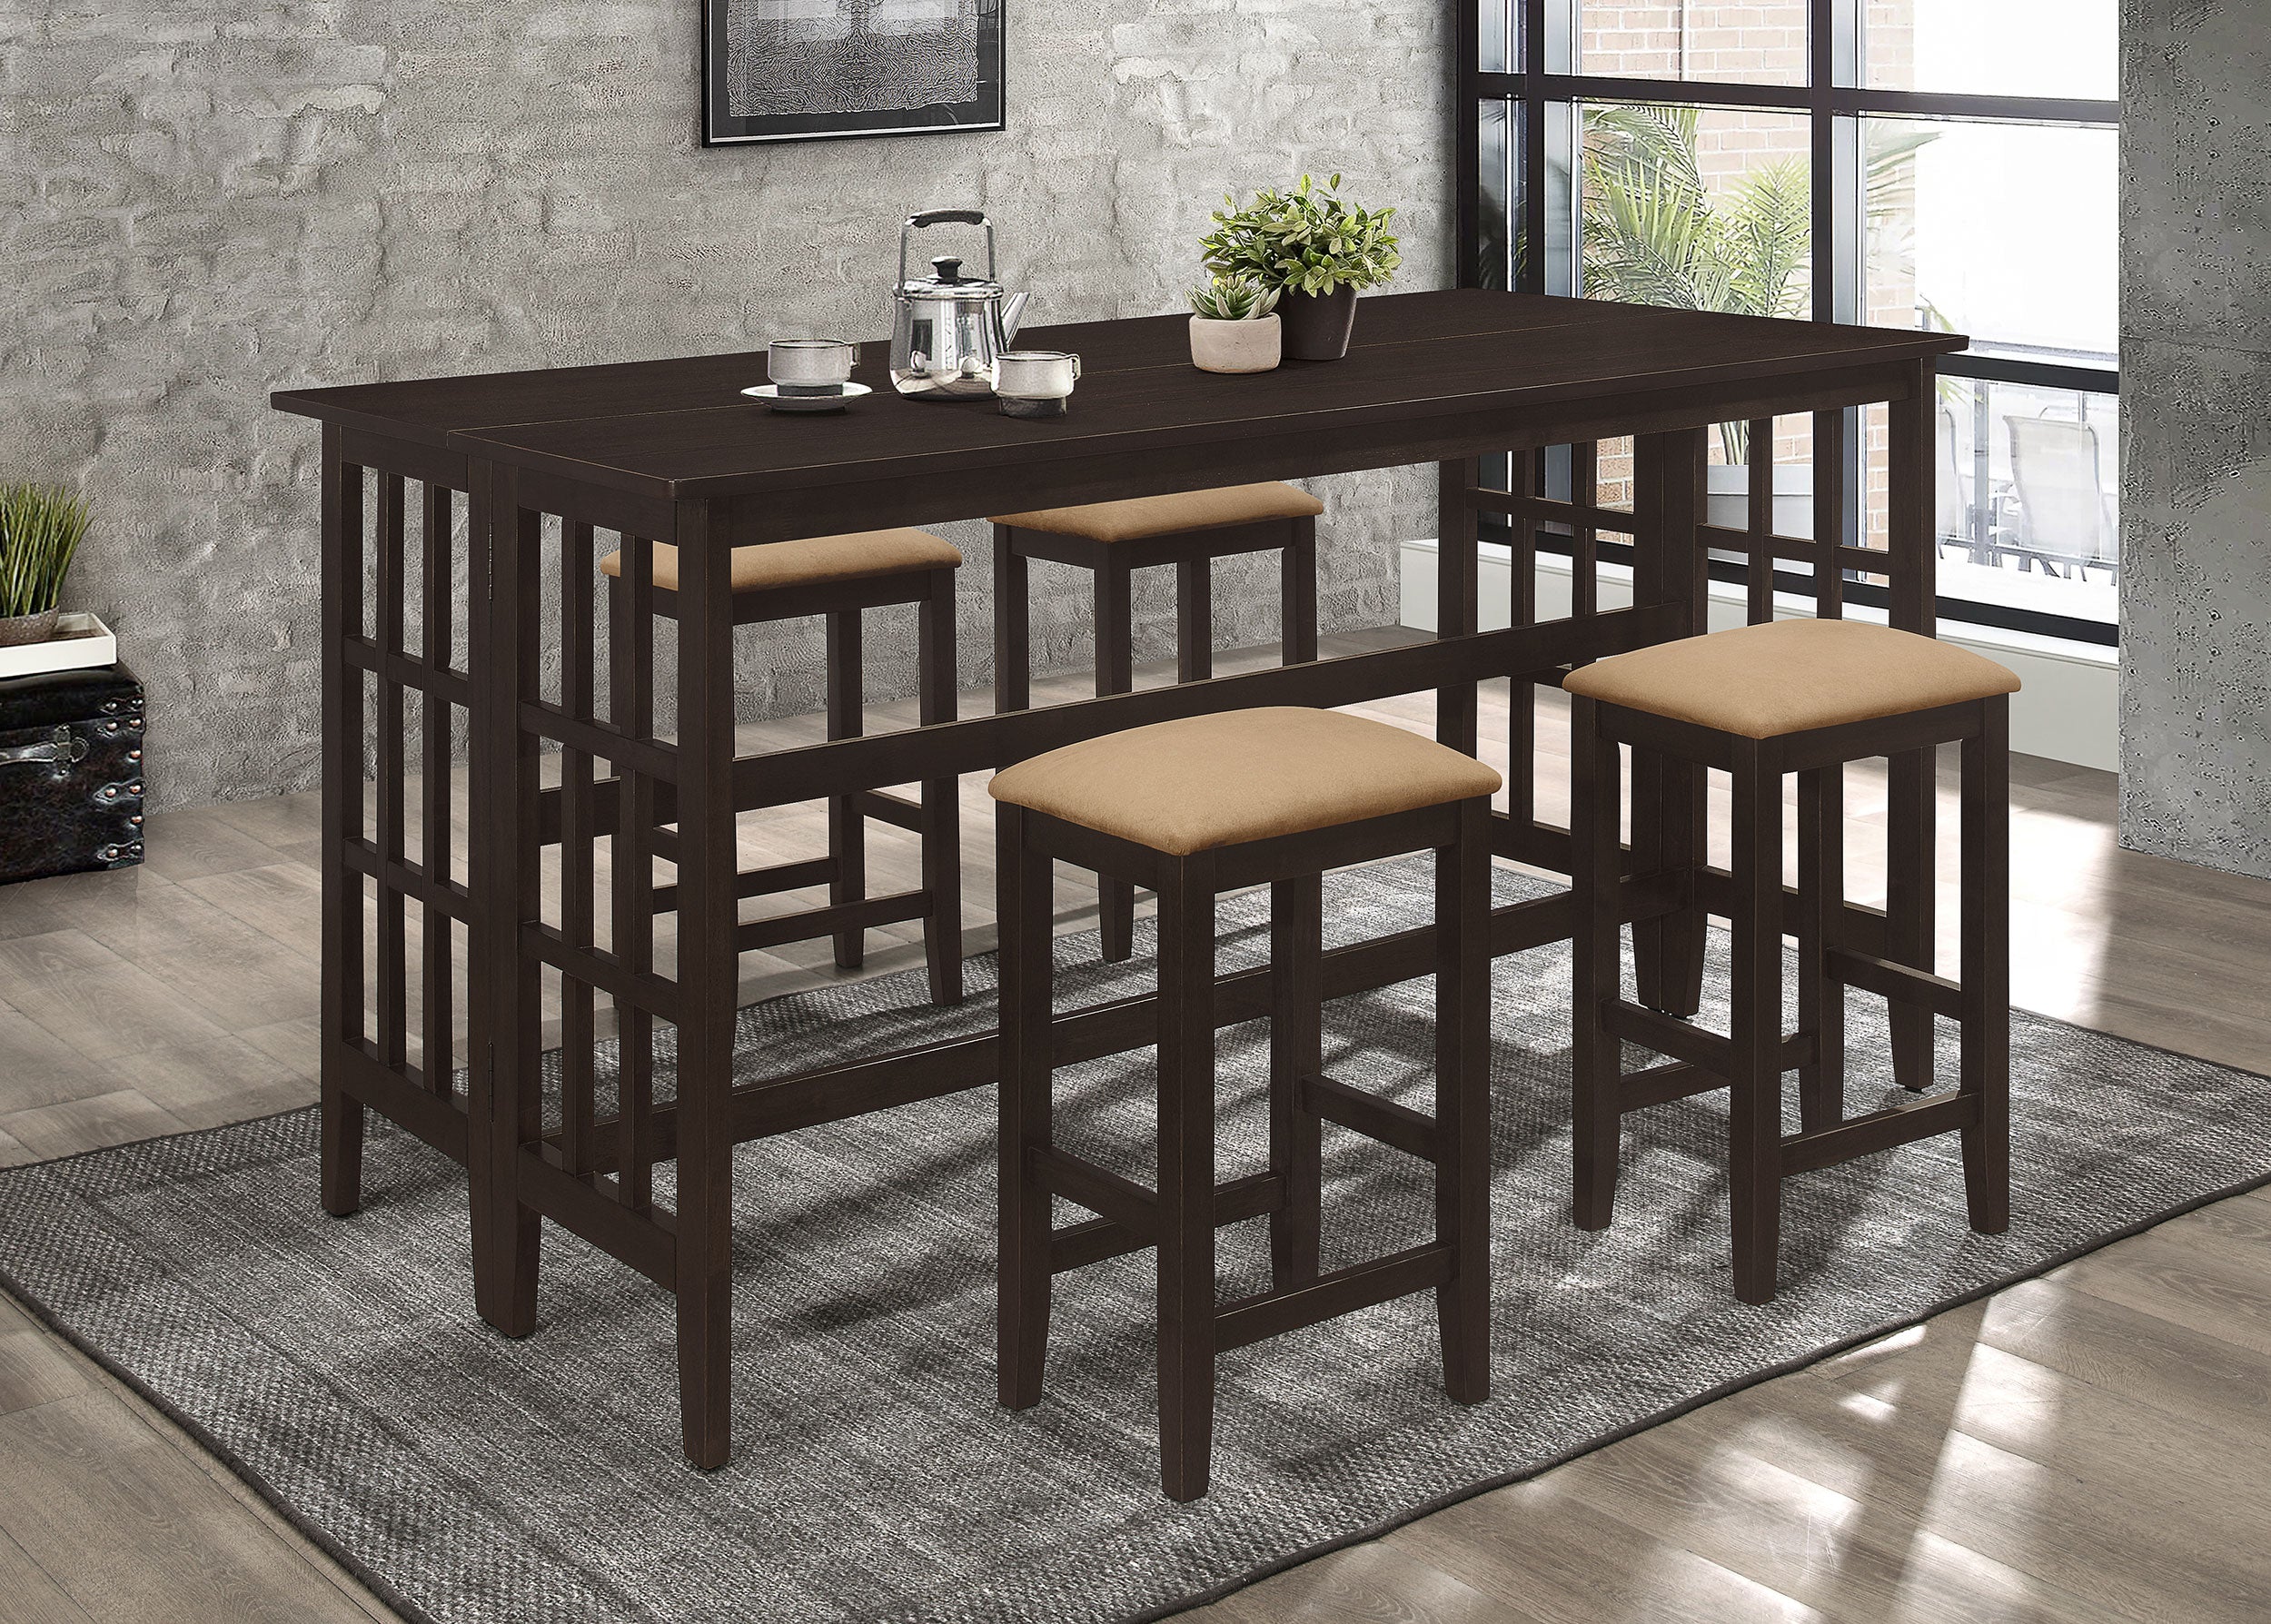 Avella 5-piece Rectangular Counter Height Dining Set Cappuccino Counter Height Table Brown